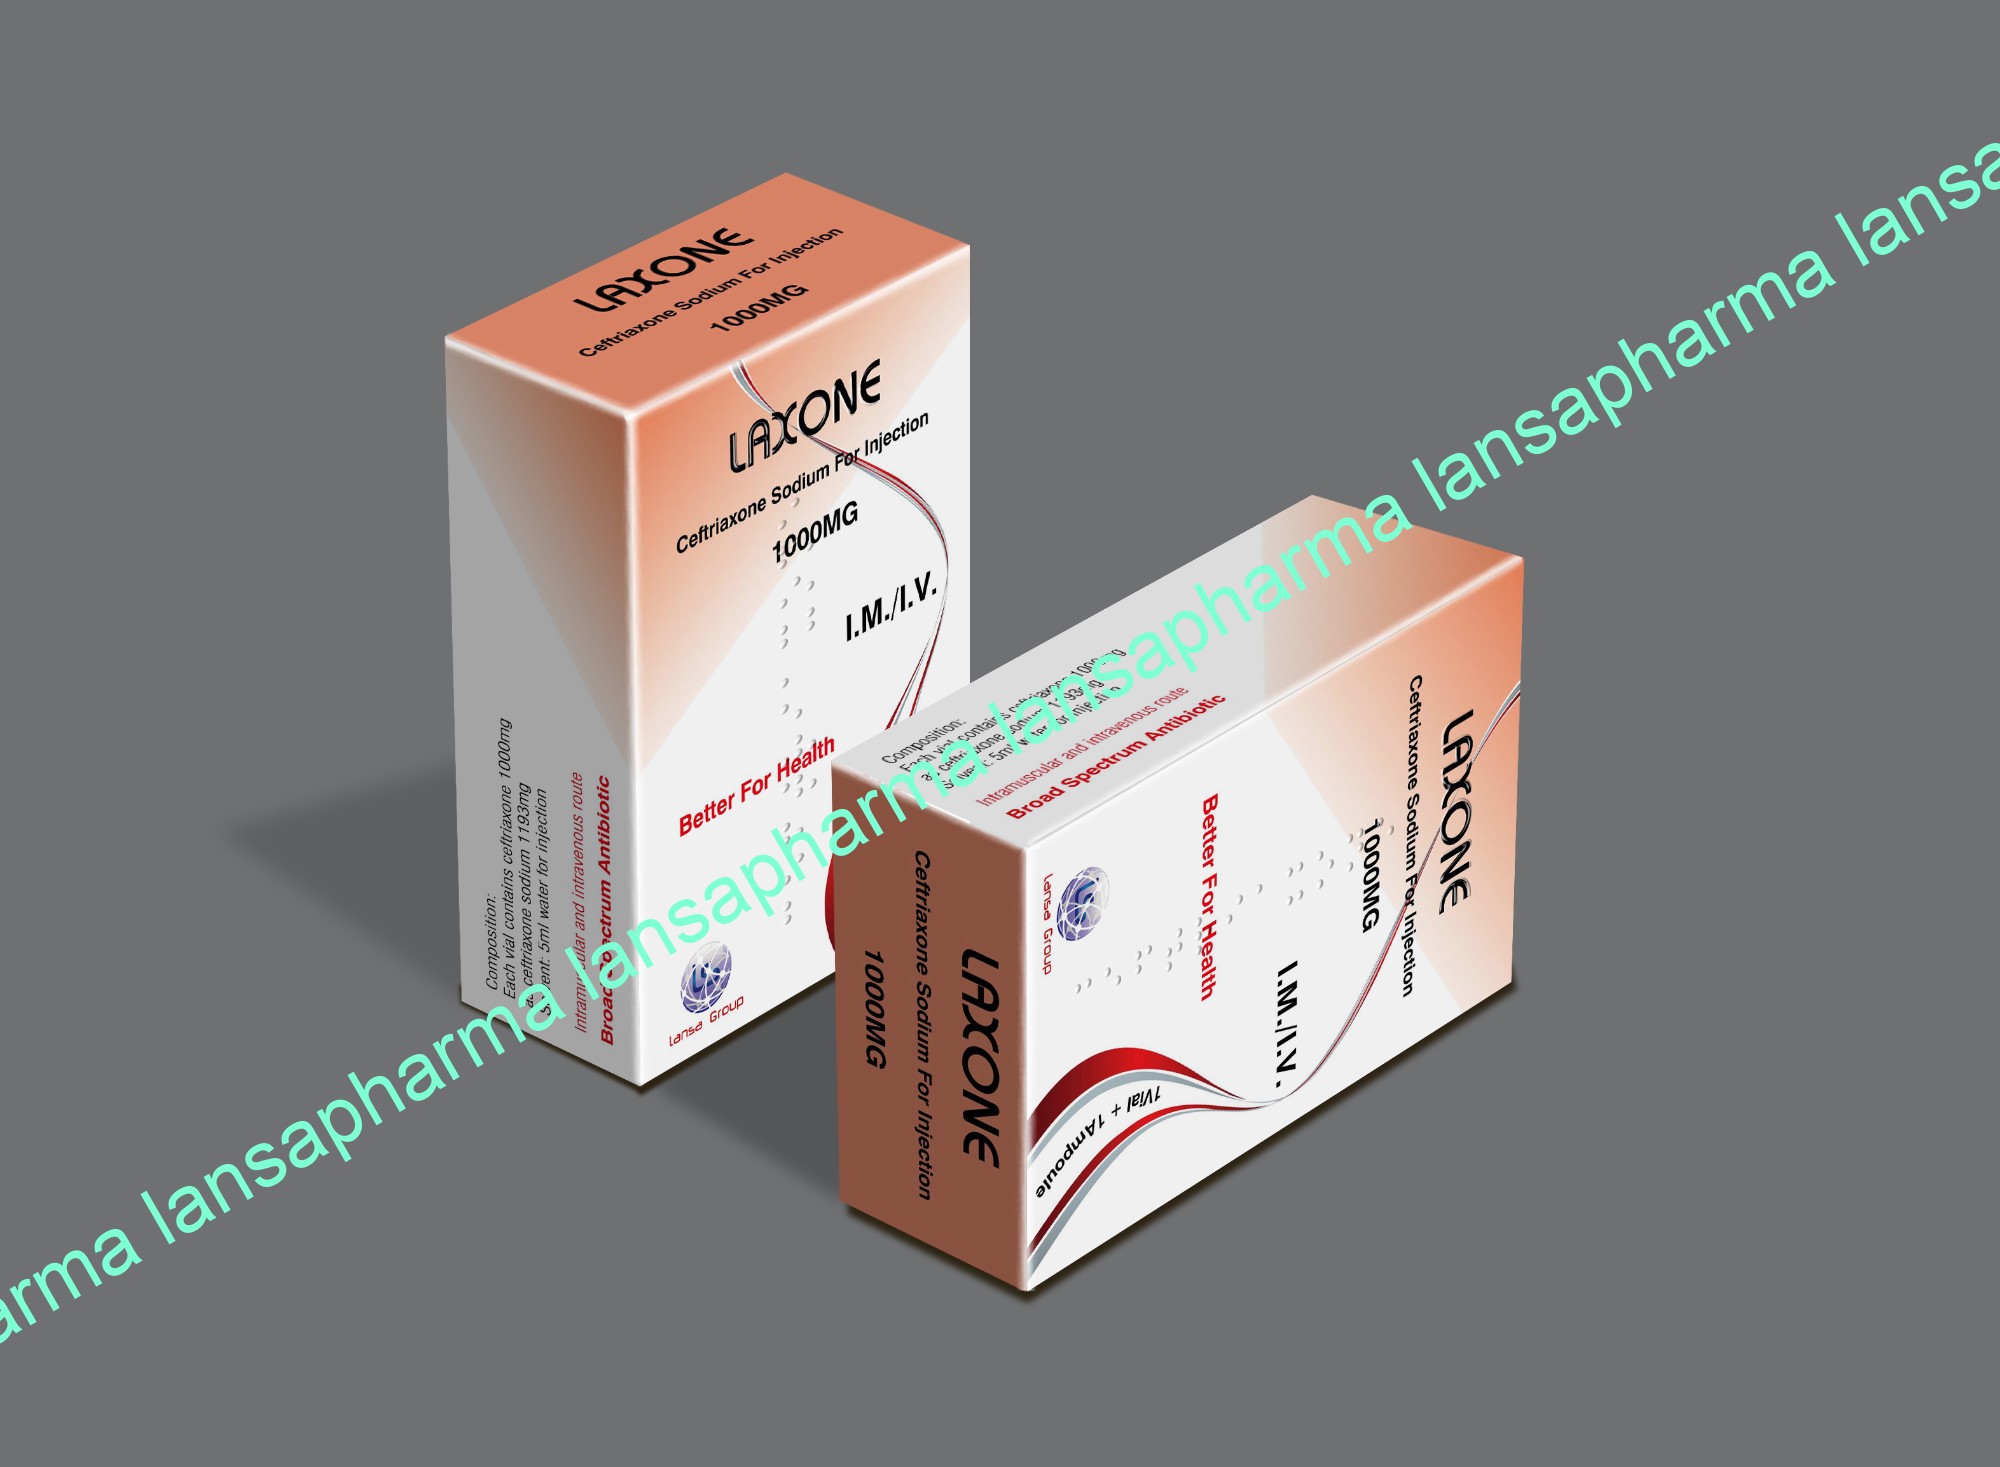 Ceftriaxone Sodium For Injection 1g